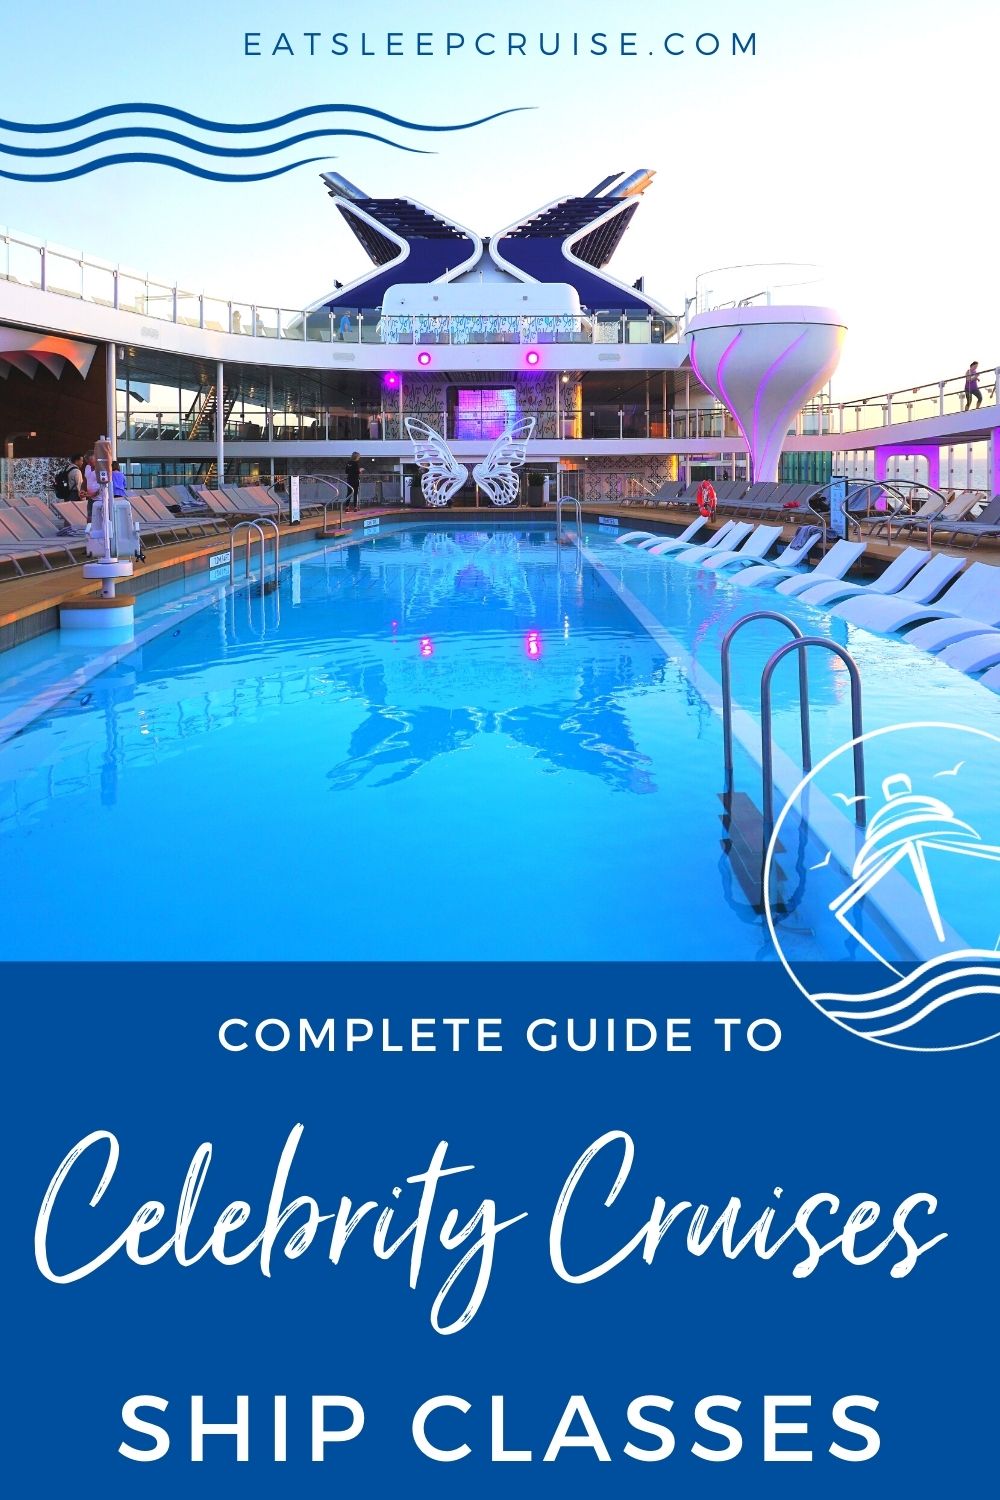 celebrity cruises classes of ships